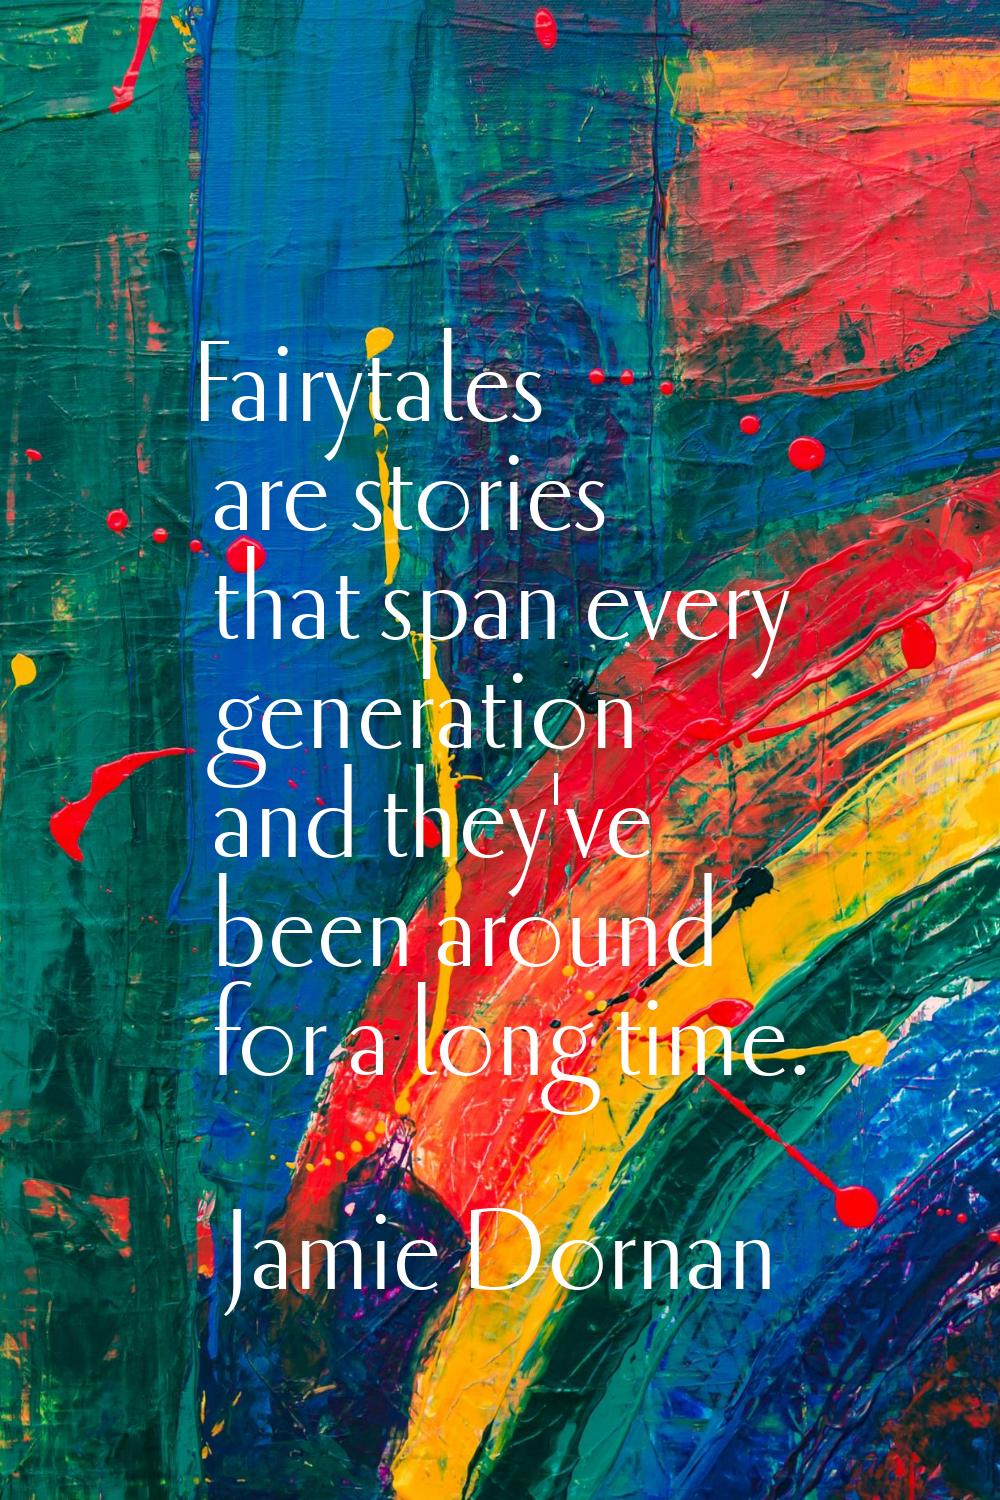 Fairytales are stories that span every generation and they've been around for a long time.